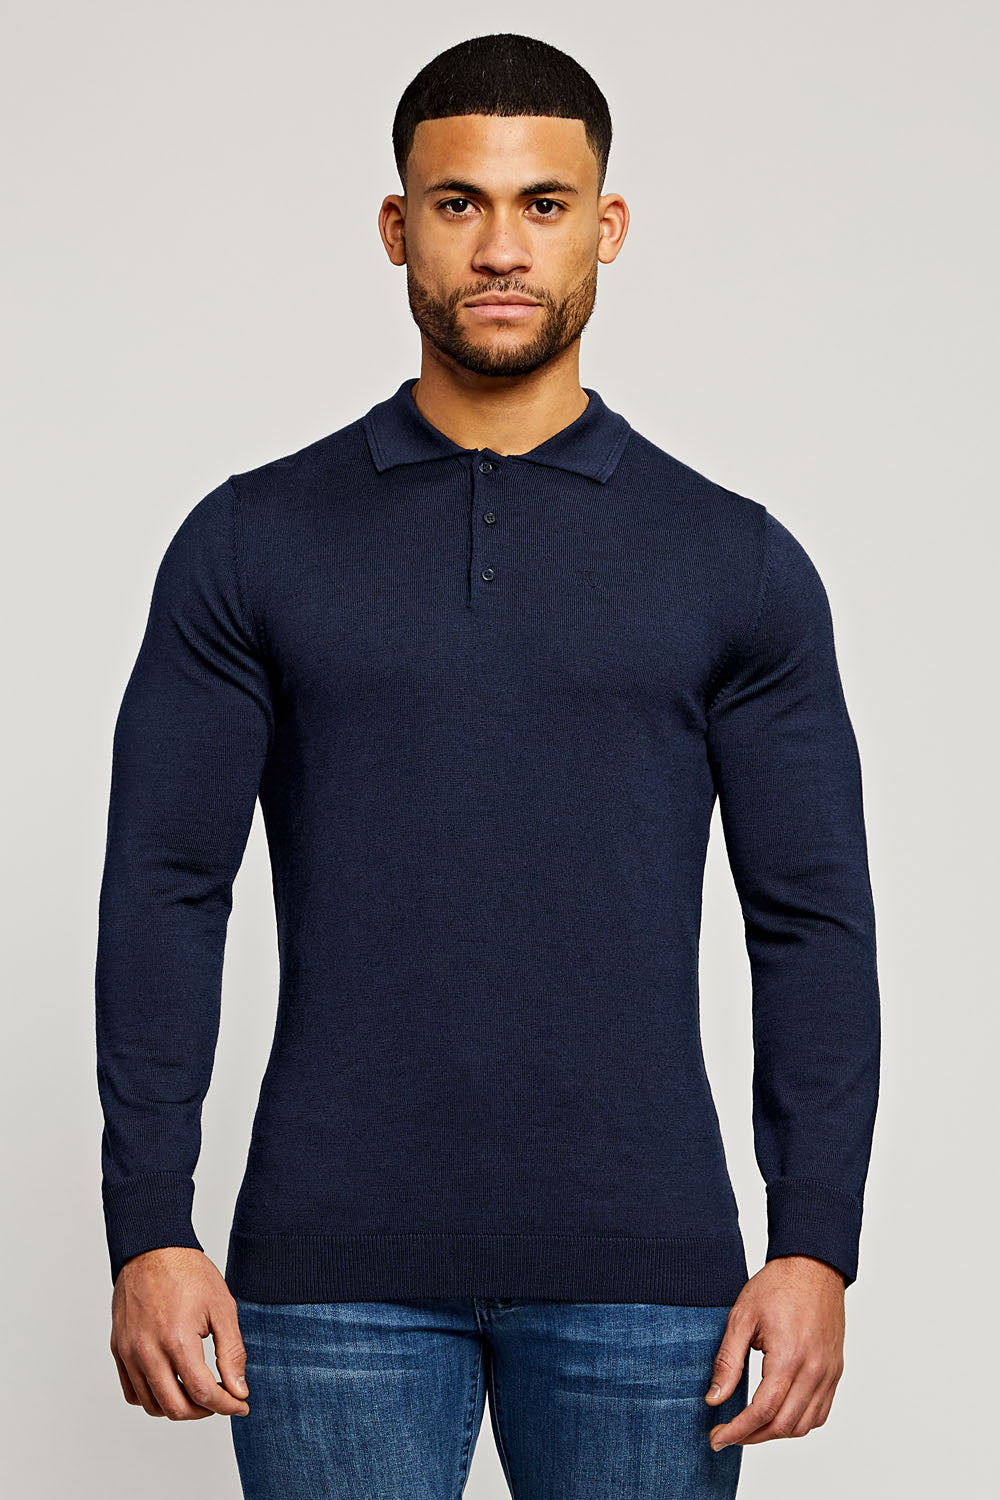 Tailored Athlete (LC) Merino Polo Shirt Long Sleeve in Navy, S